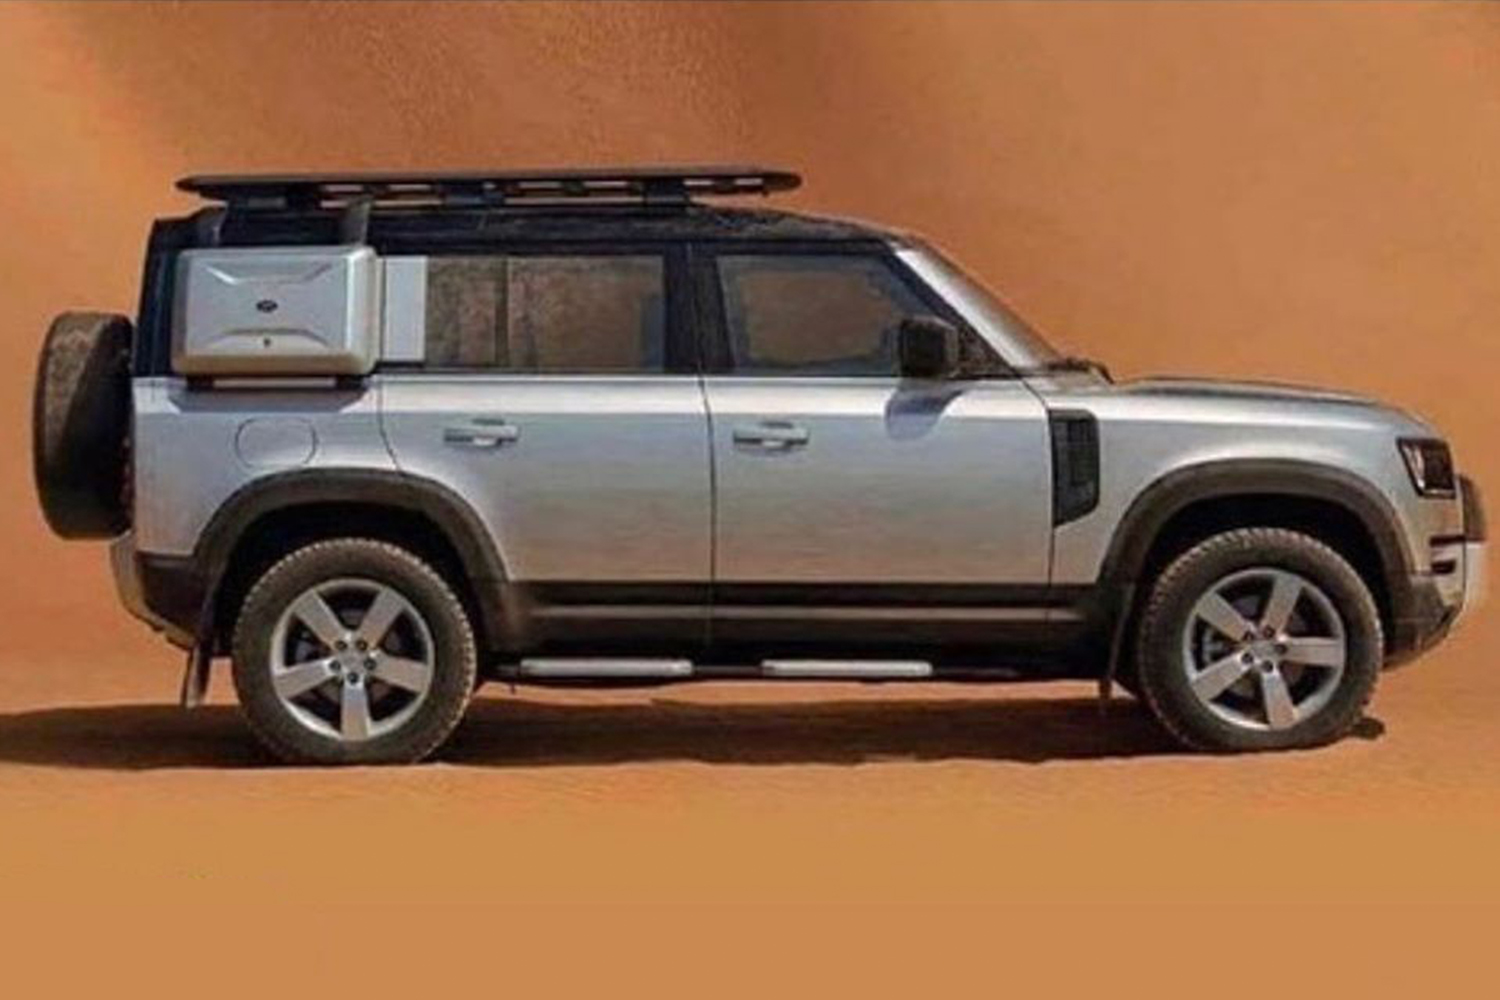 Leaked Photo of the New 2020 Land Rover Defender